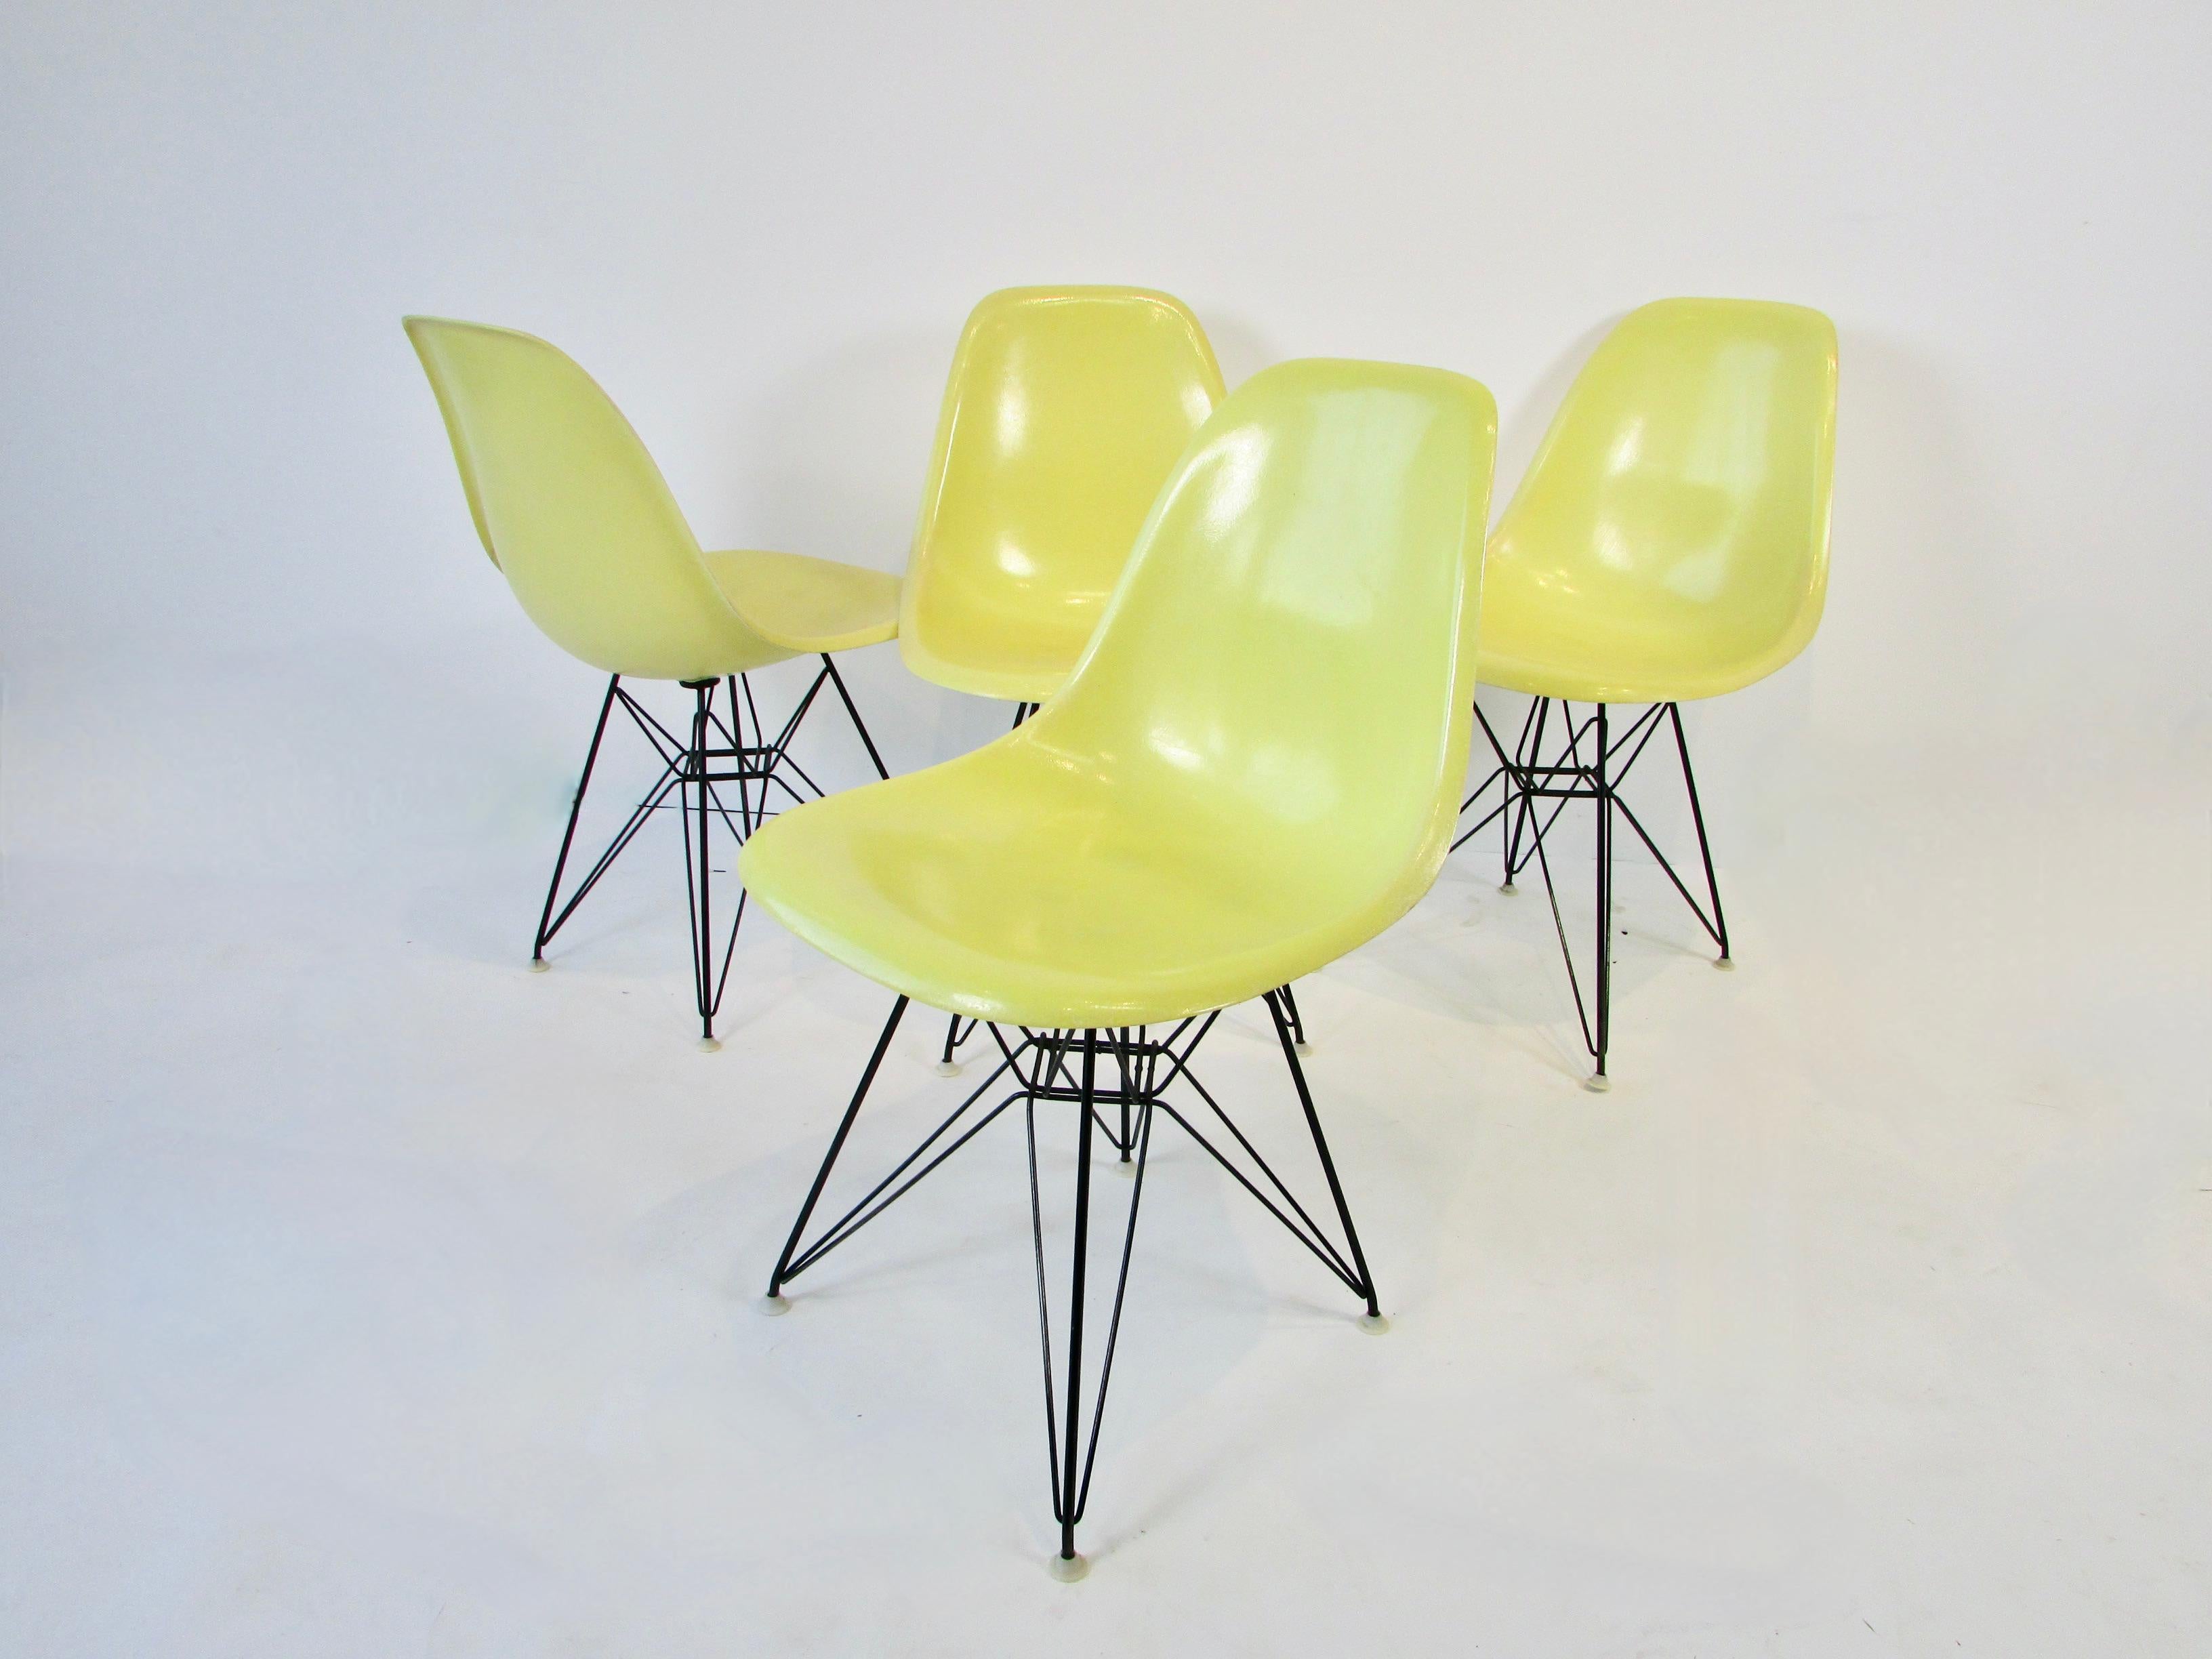 American Set of Four Vivid Yellow Fiberglass Eames DSR Chairs on Black Eiffel Tower Bases For Sale